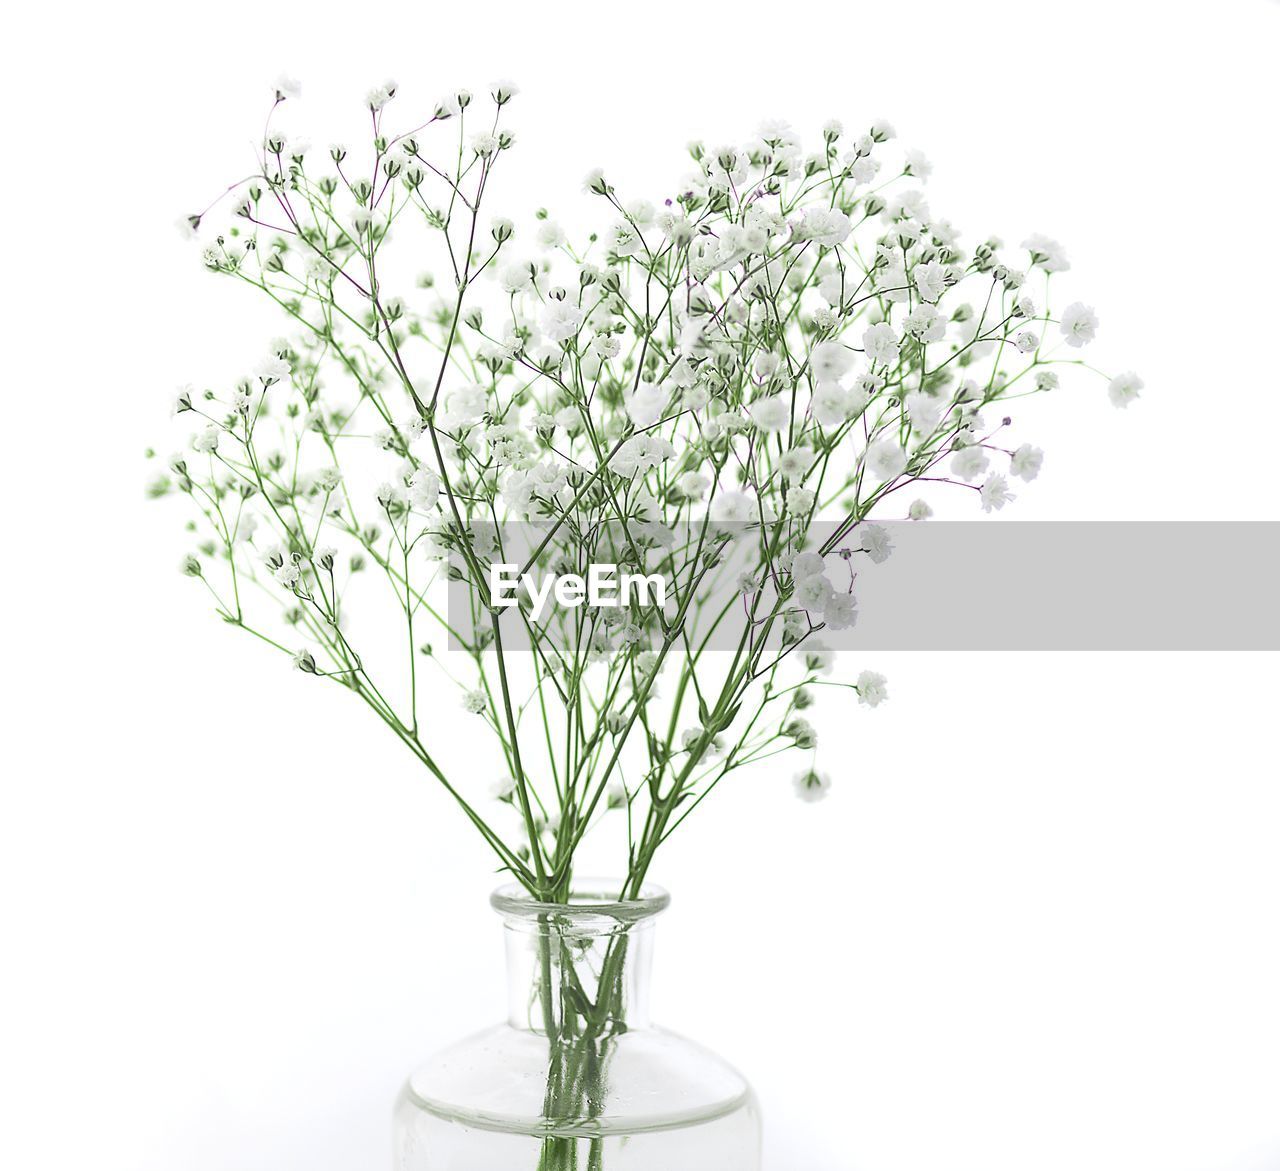 CLOSE-UP OF WHITE FLOWERING PLANT IN VASE AGAINST WALL